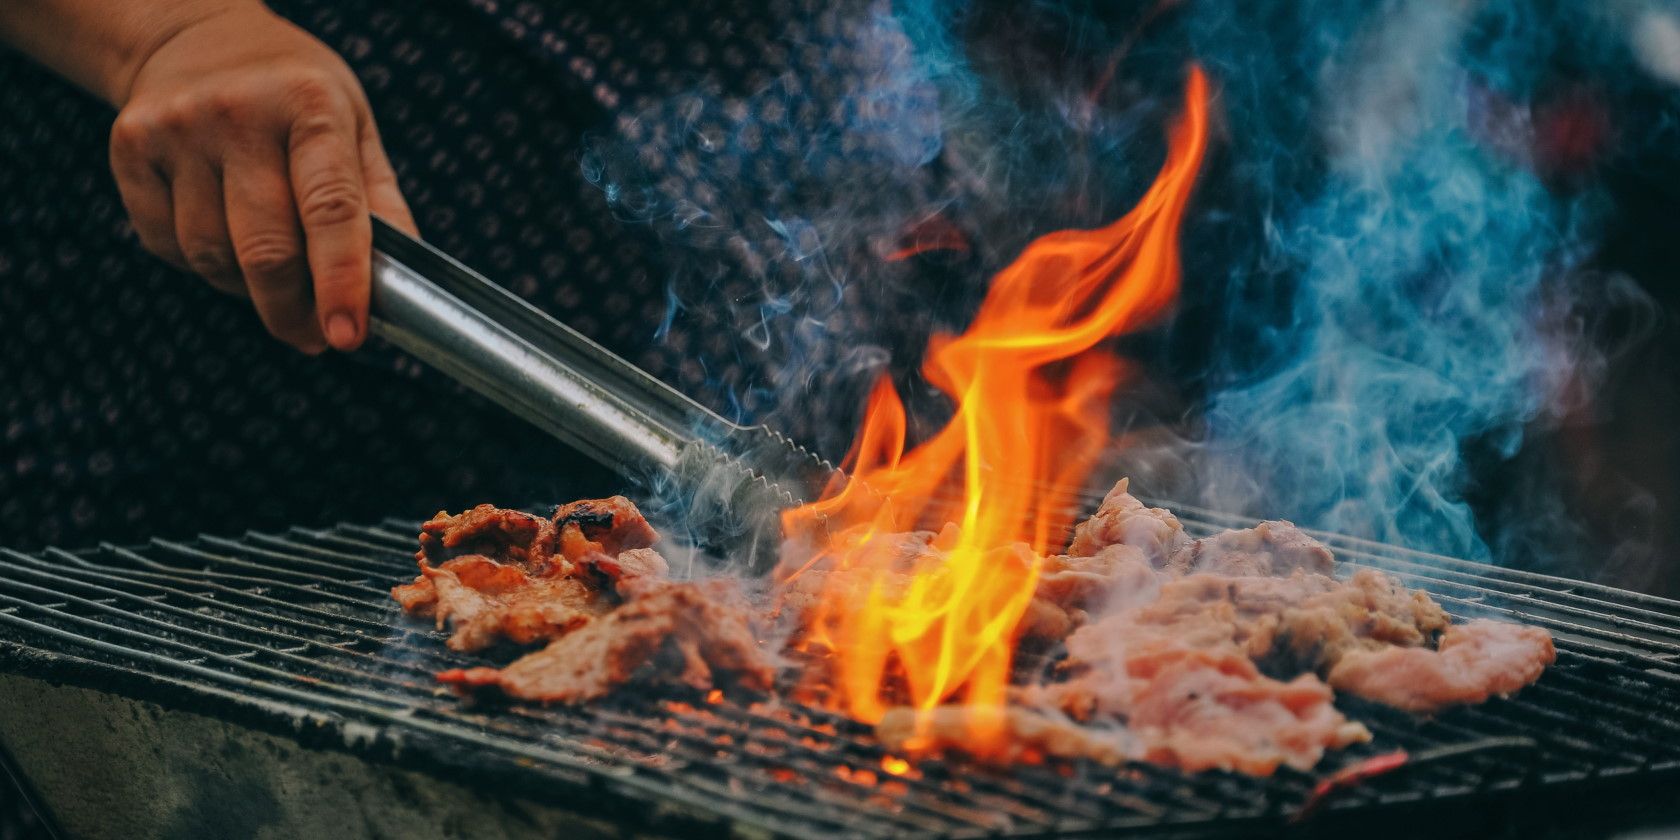 close-up of person grilling meat over flames